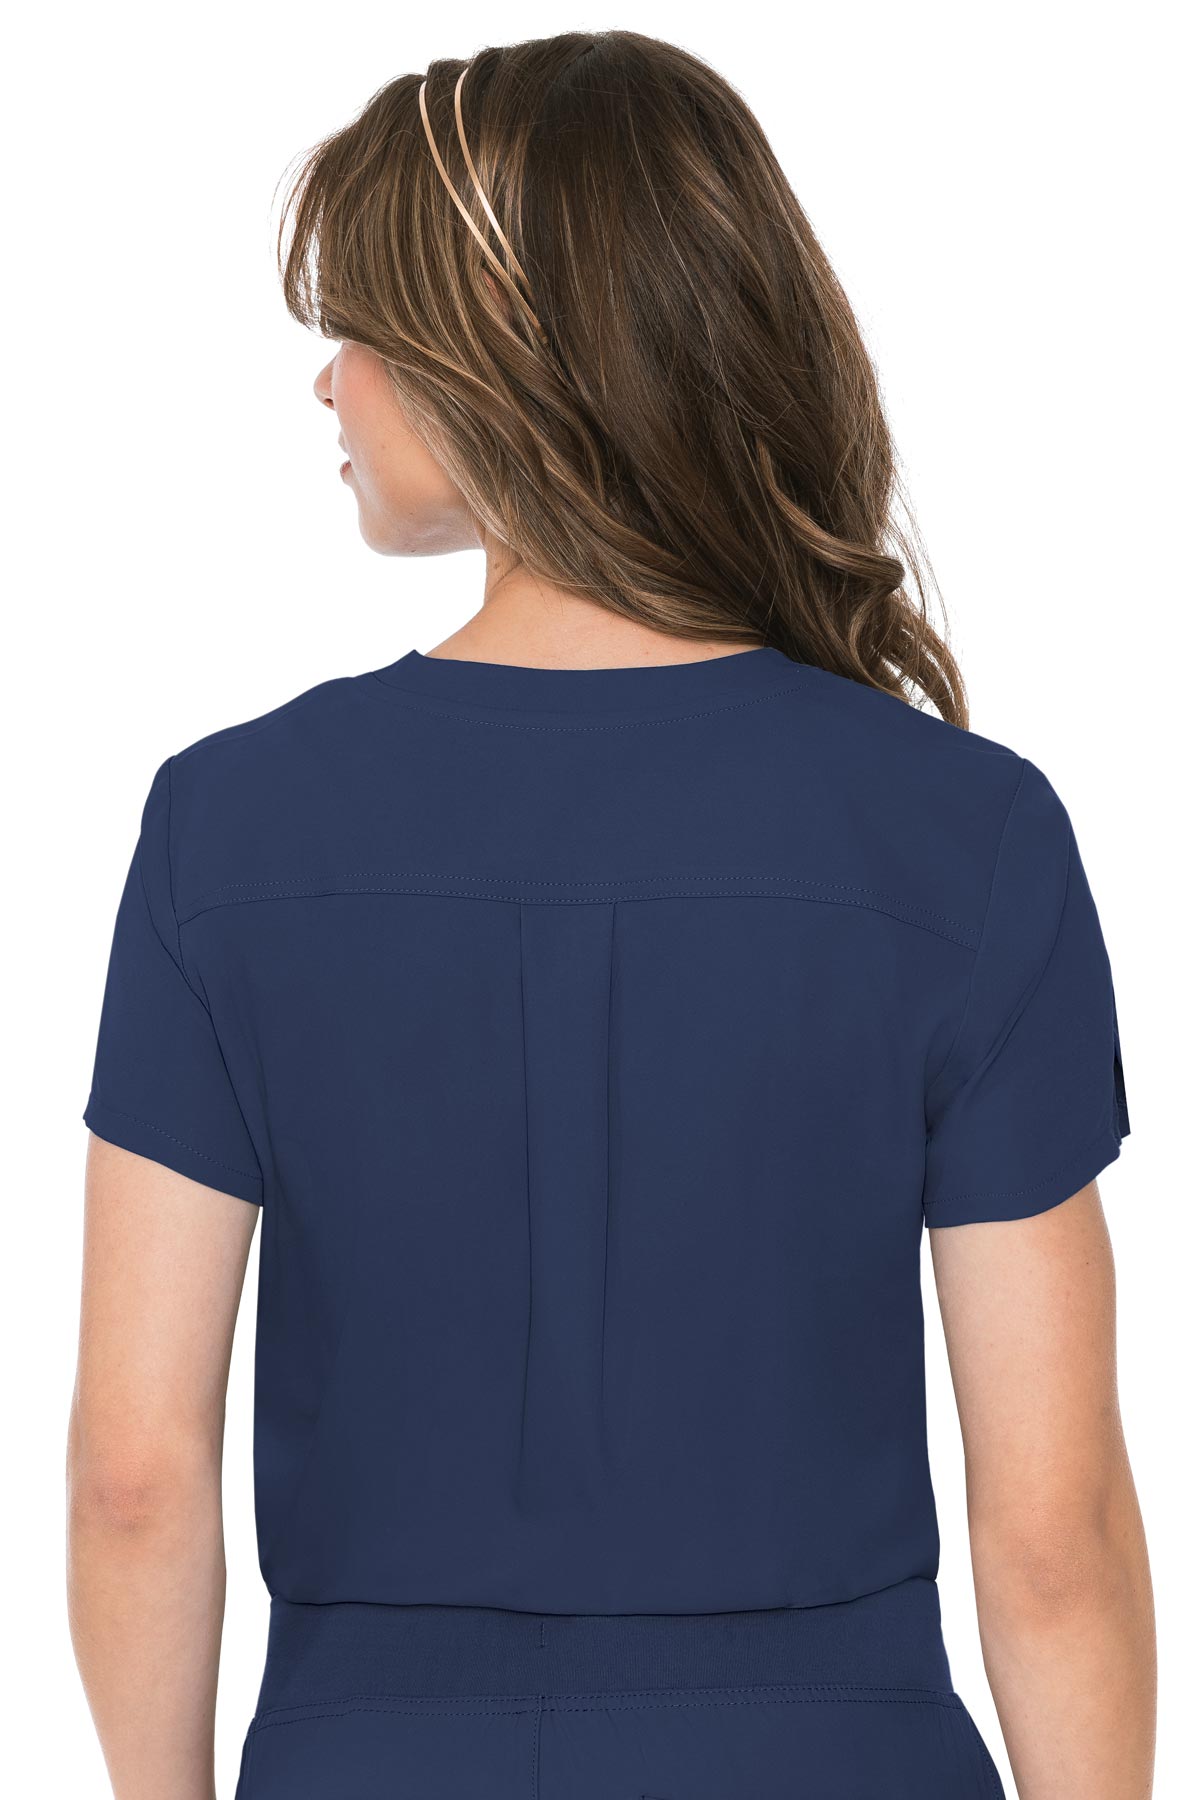 Med Couture 2432 Insight 1 Pocket Women's Tuck-In Top